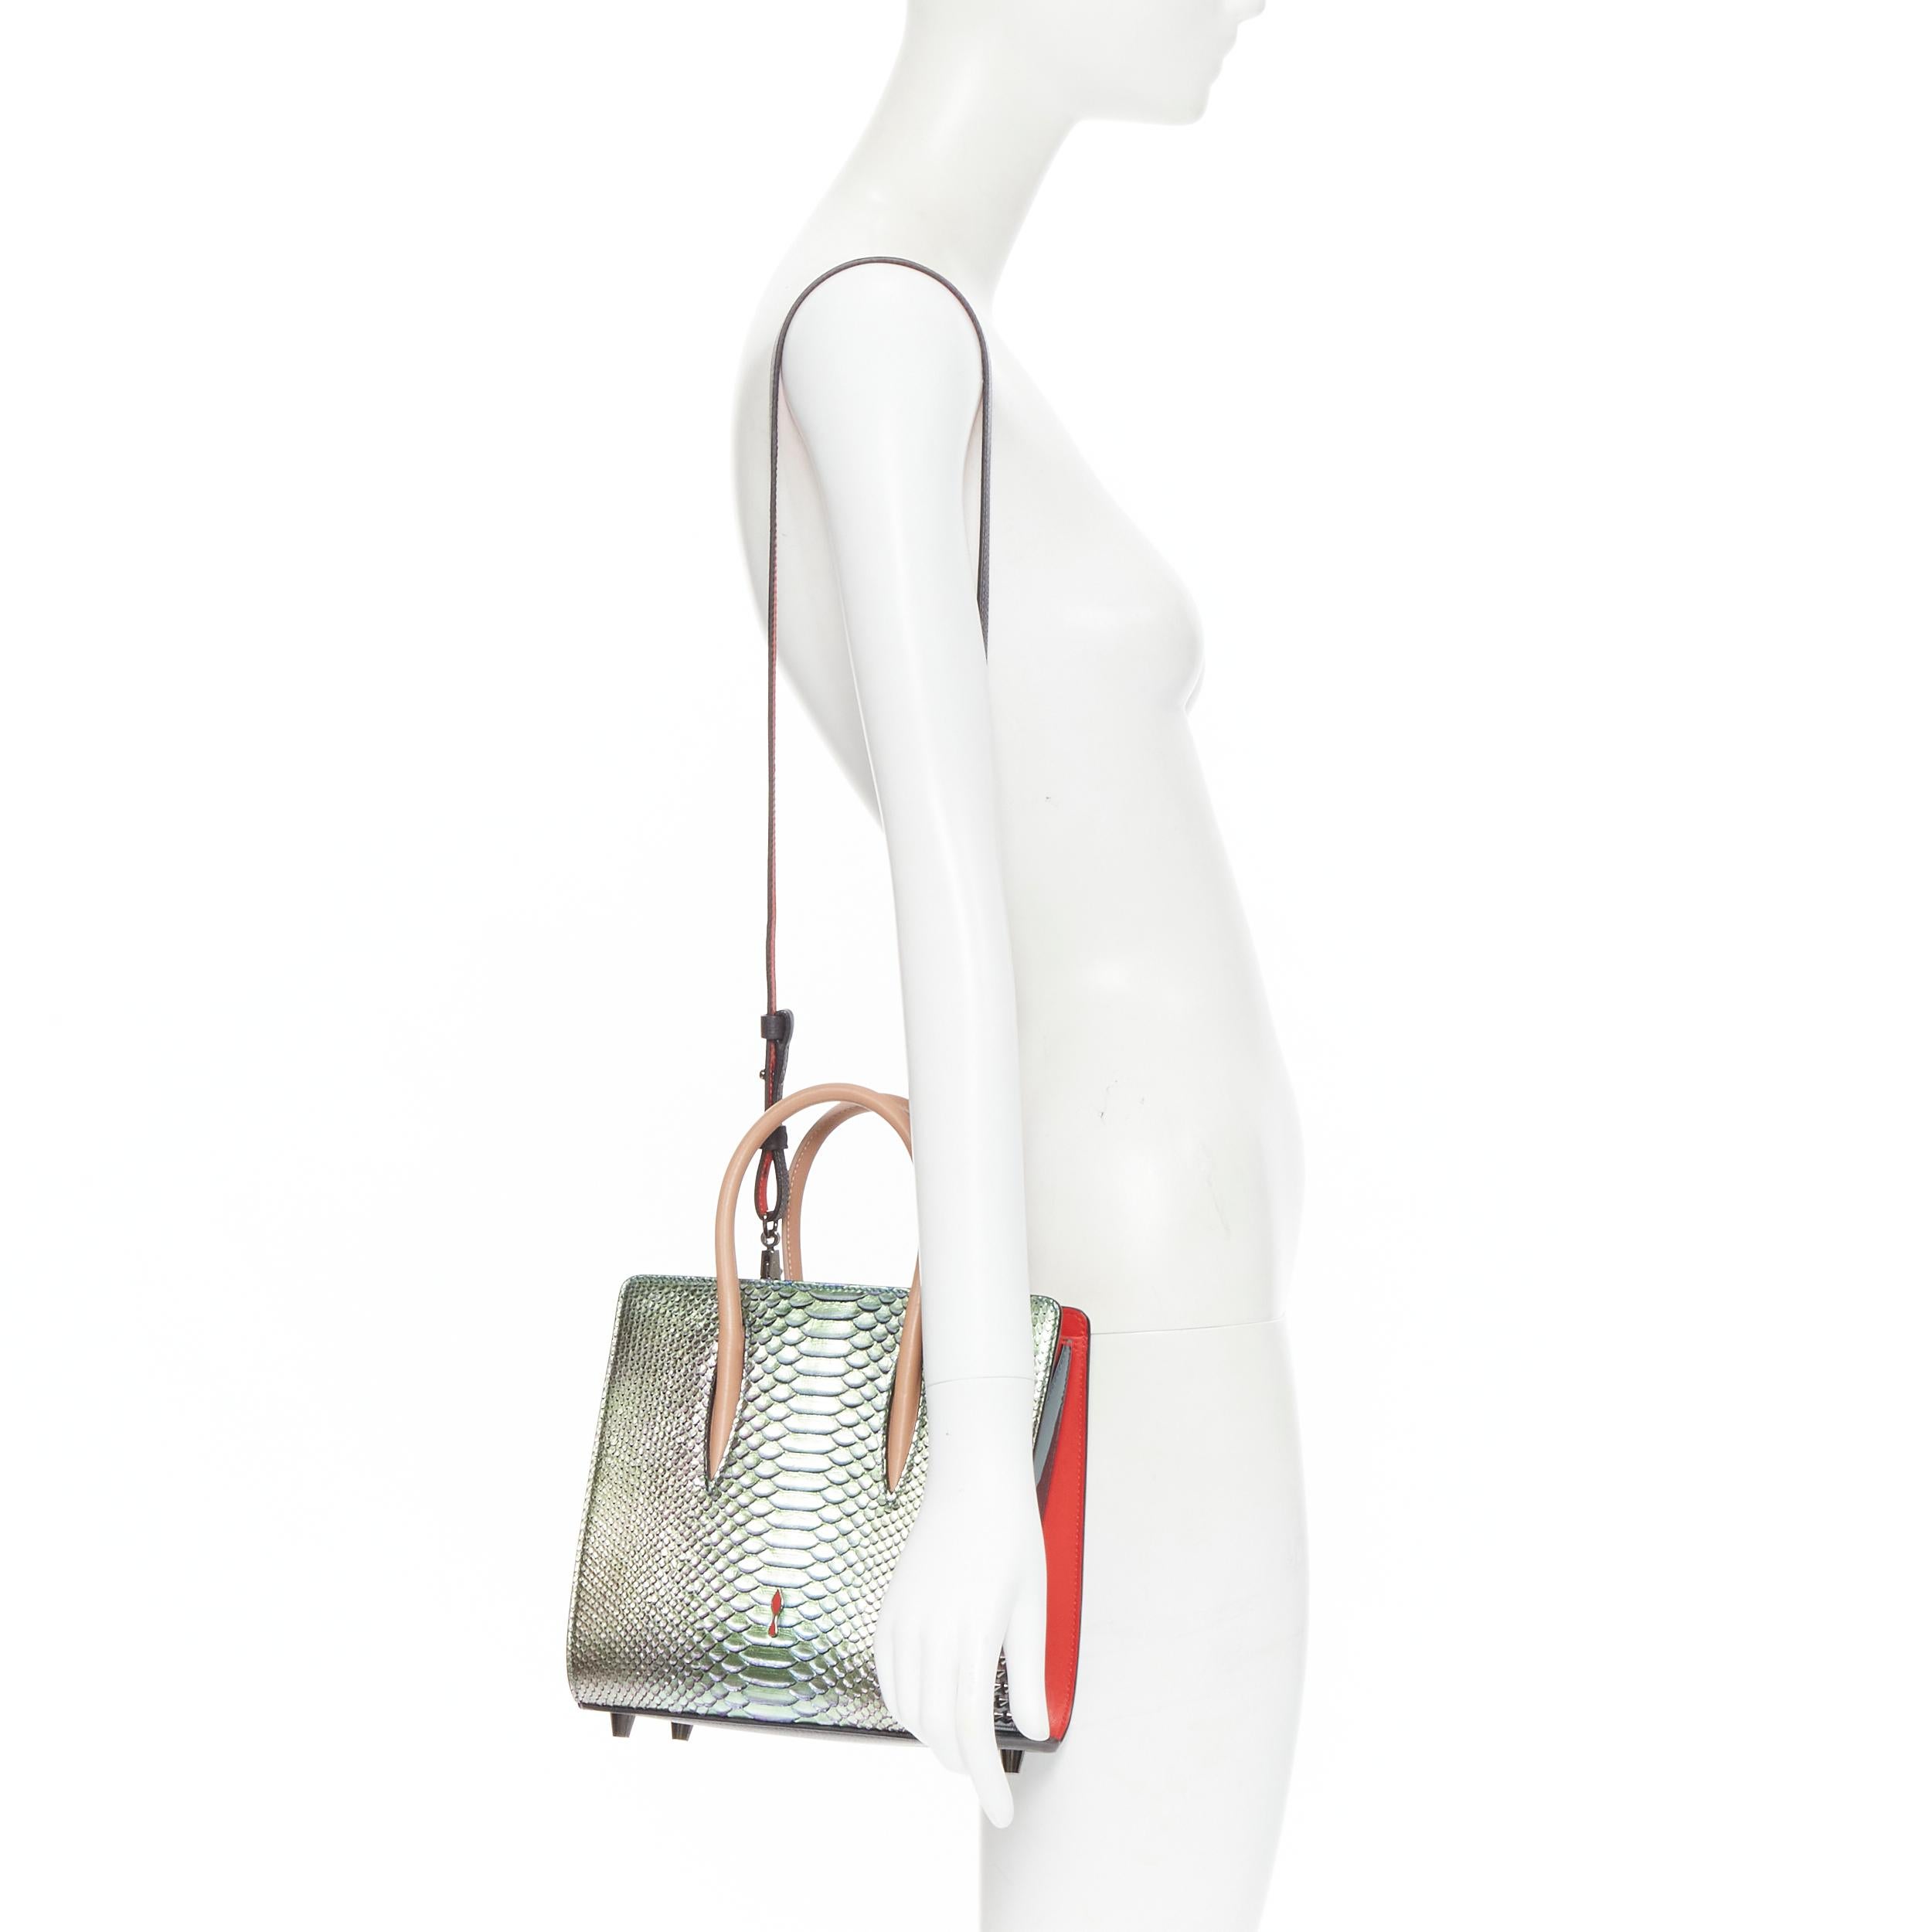 CHRISTIAN LOUBOUTIN Paloma iridescent snakeskin green patent crossbody satchel 
Reference: TGAS/B01462 
Brand: Christian Louboutin 
Designer: Christian Louboutin 
Model: Paloma bag 
Material: Leather 
Color: Green 
Pattern: Solid 
Closure: Magnet